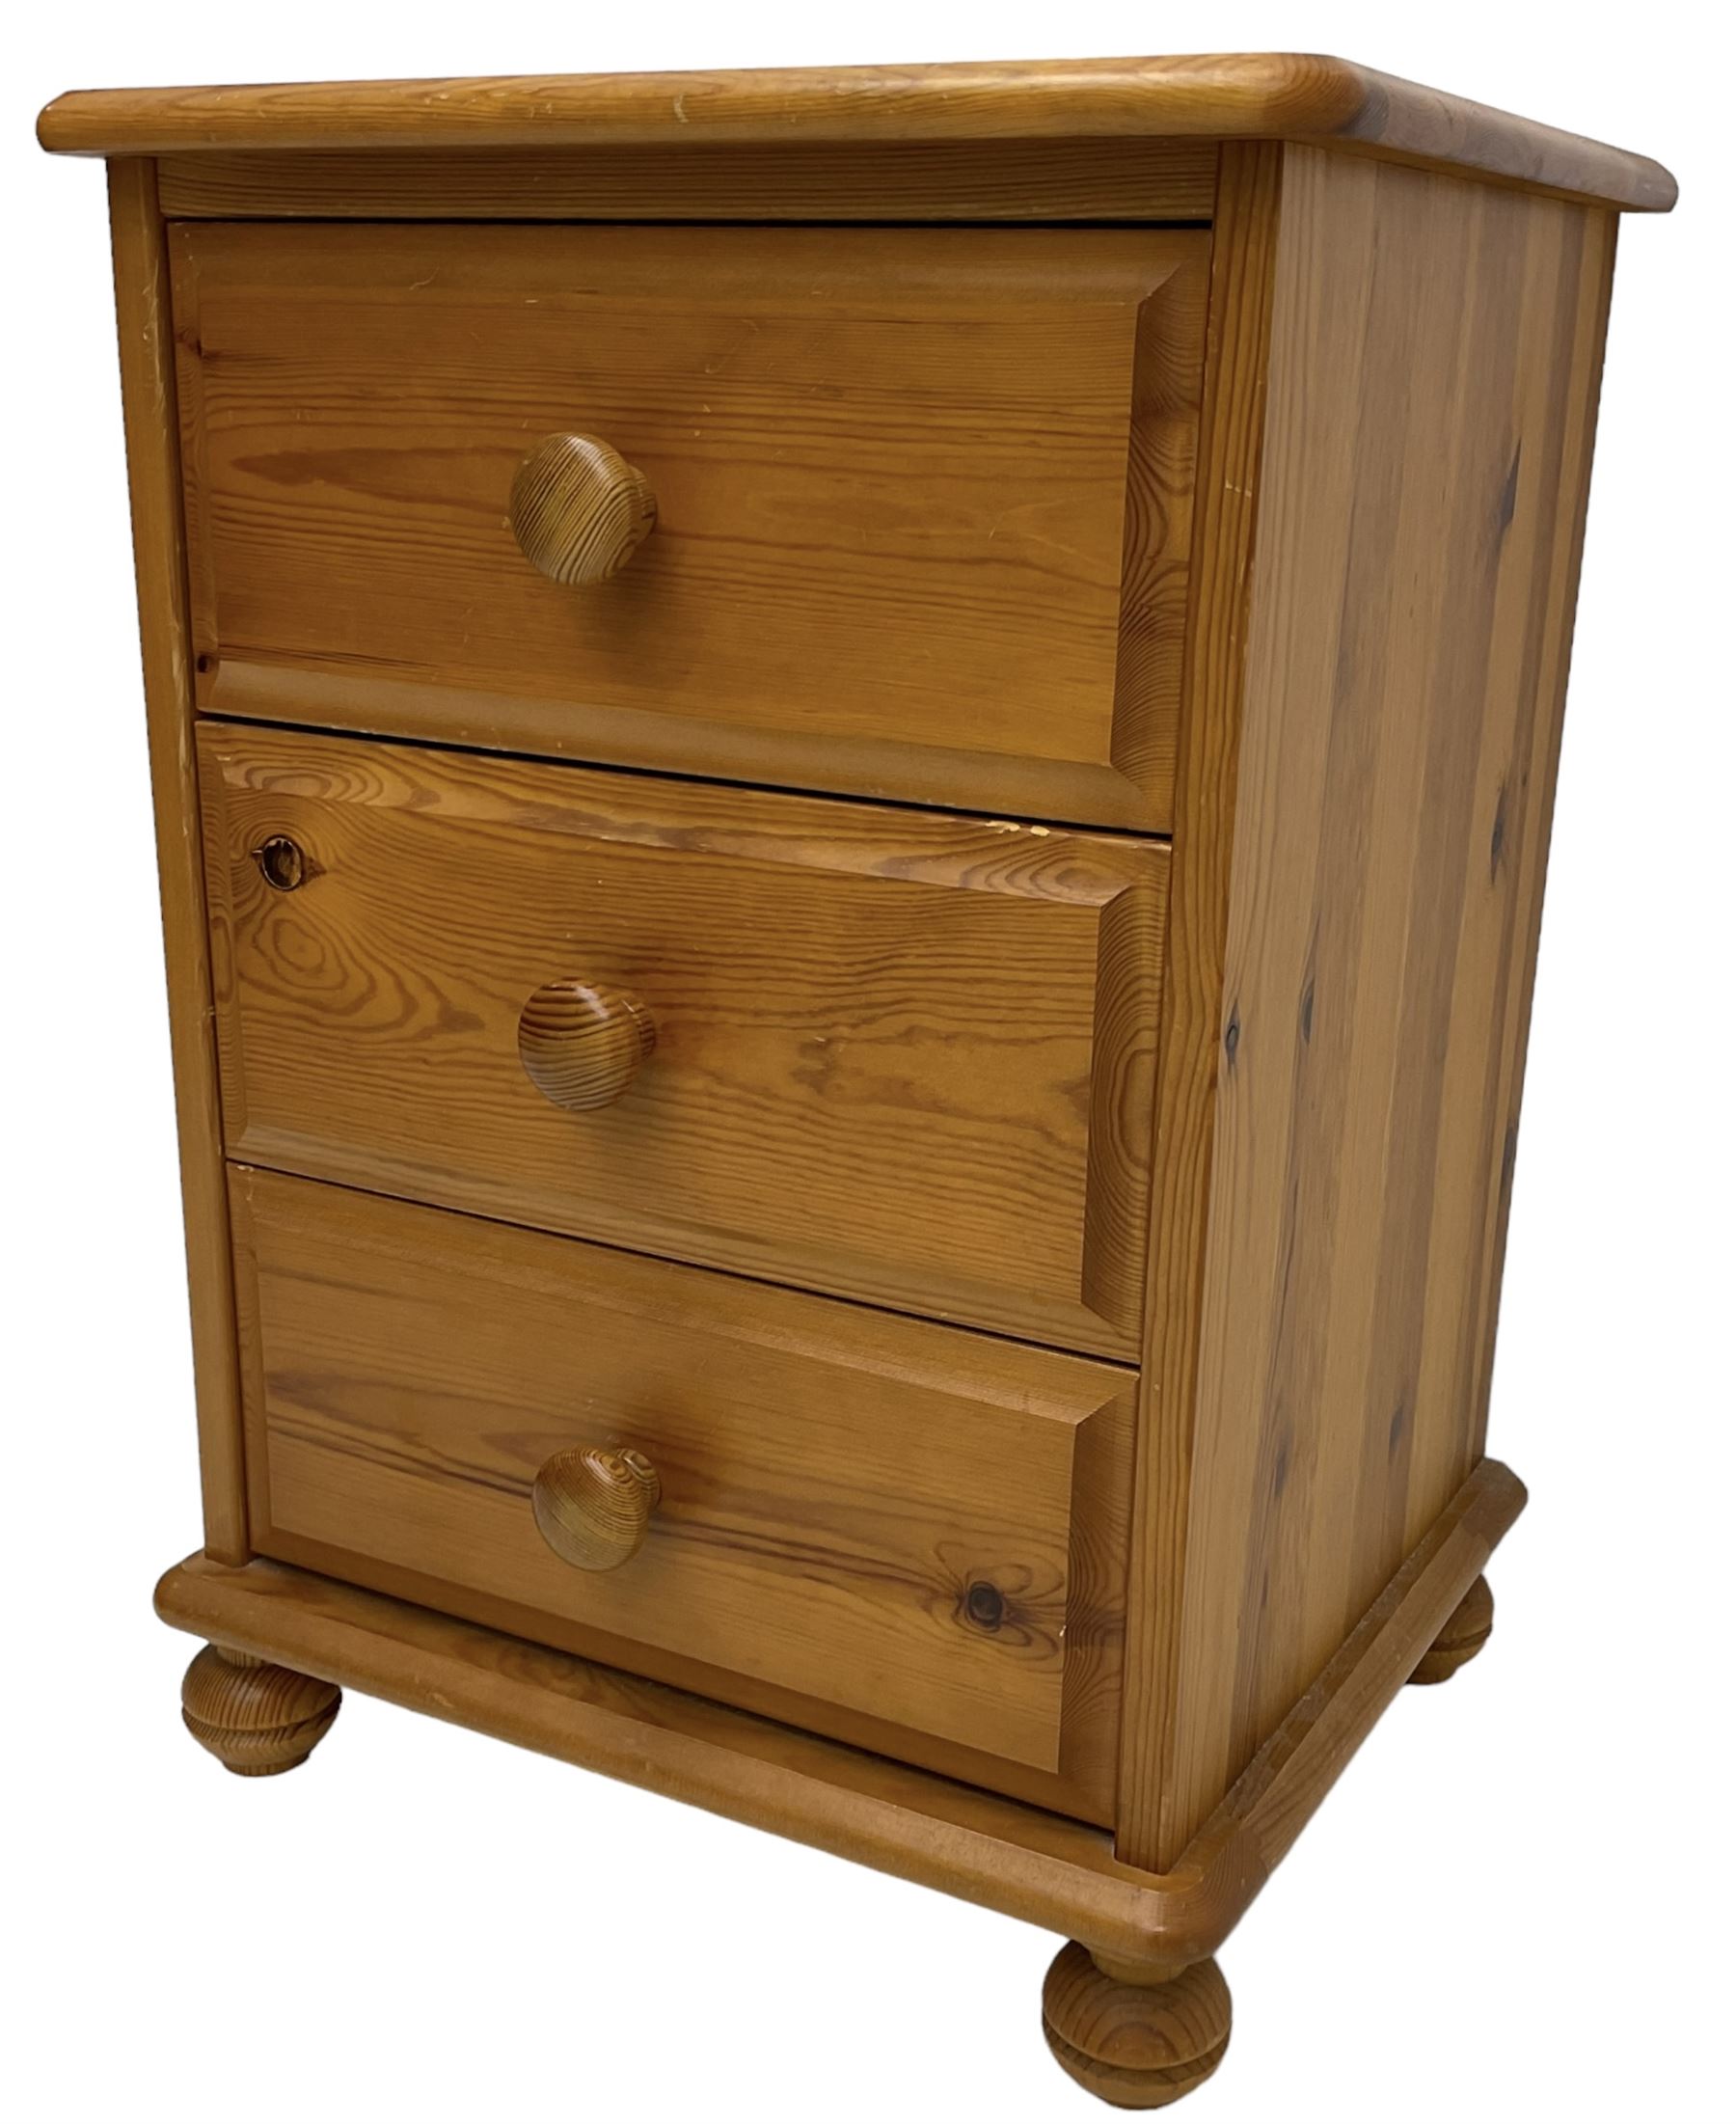 Polished pine chest - Image 4 of 12